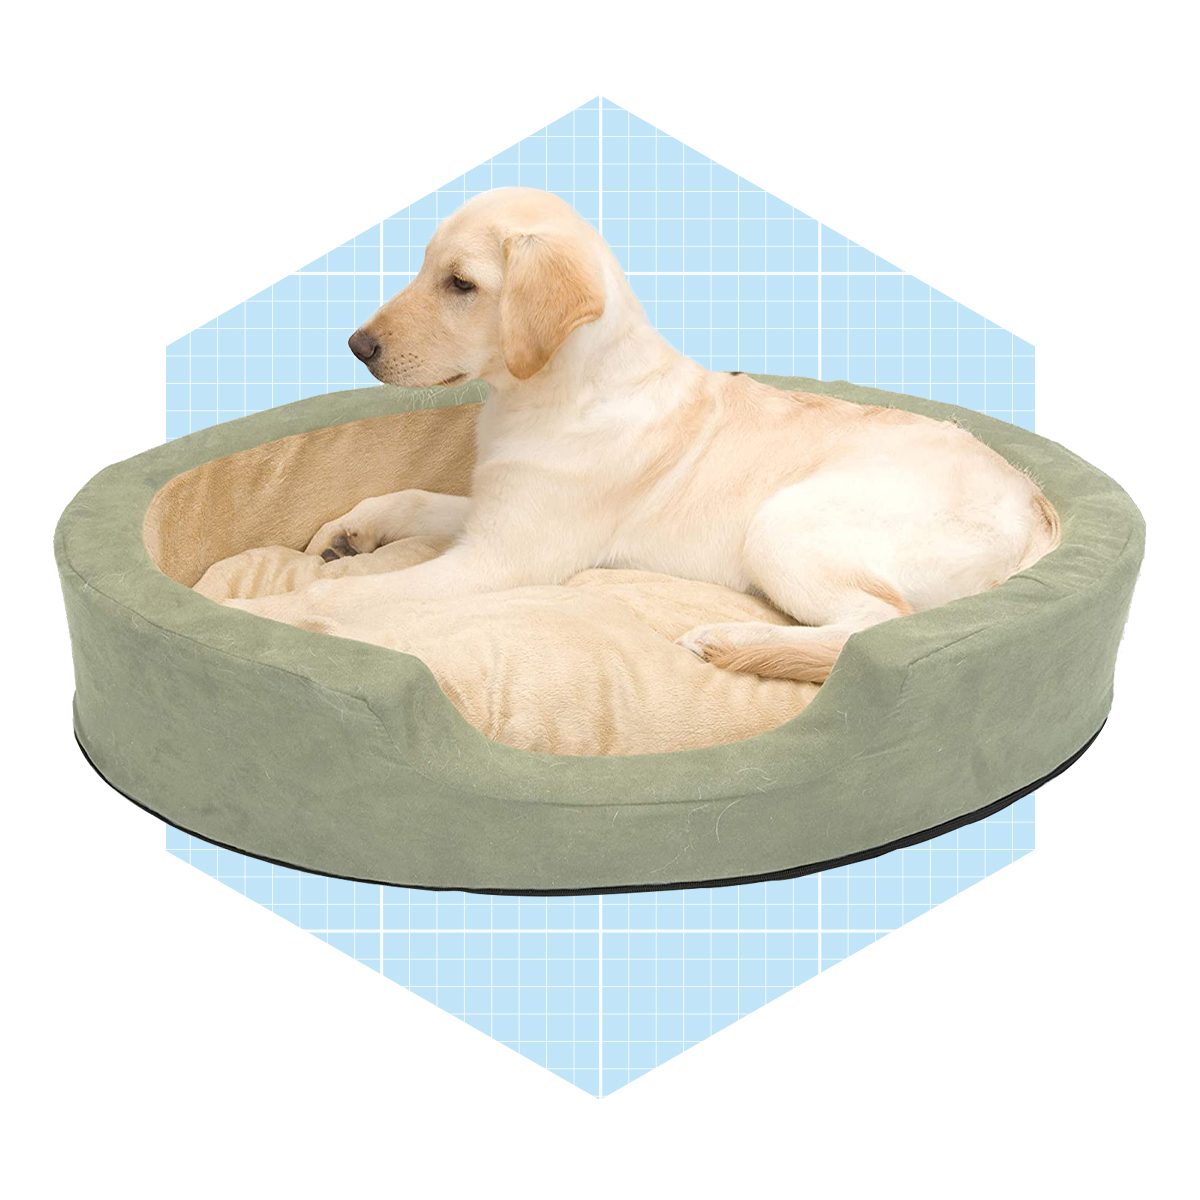 K&h Pet Products Heated Thermo Snuggly Sleeper Indoor Pet Bed For Dogs Ecomm Amazon.com